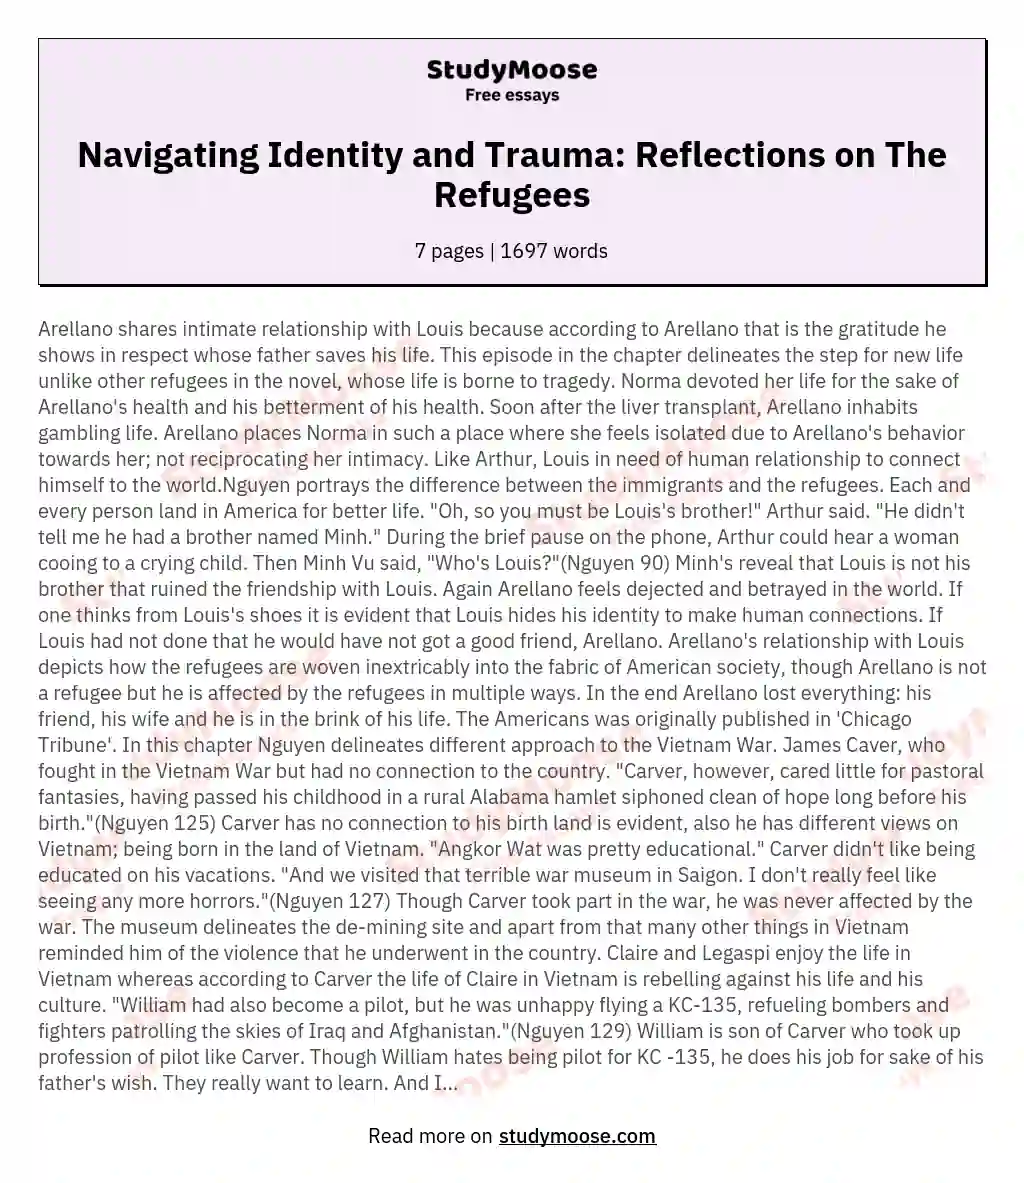 Navigating Identity and Trauma: Reflections on The Refugees essay